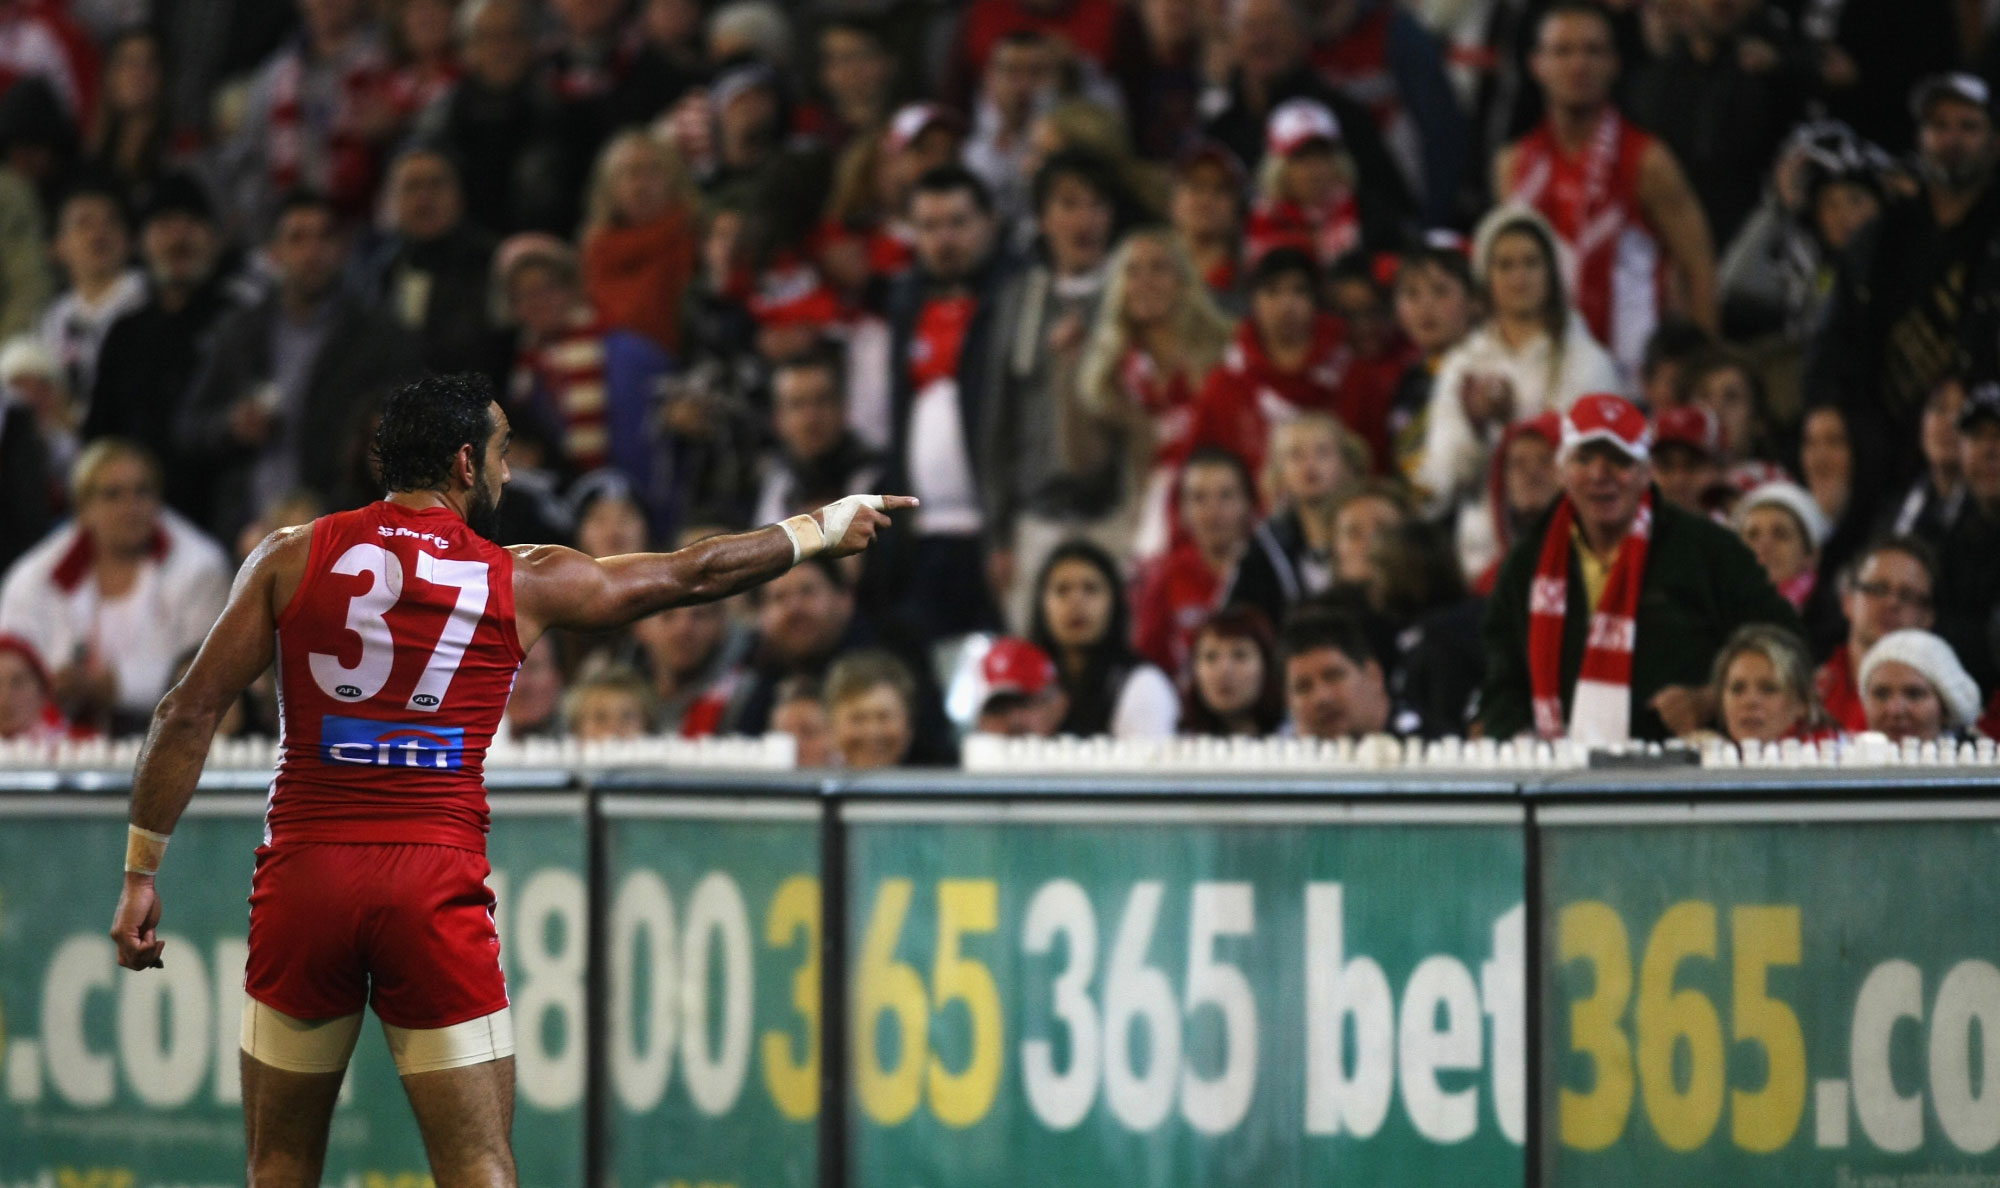 <p>Adam Goodes points out a spectator who made racist comments about him, 24 May 2013</p>
